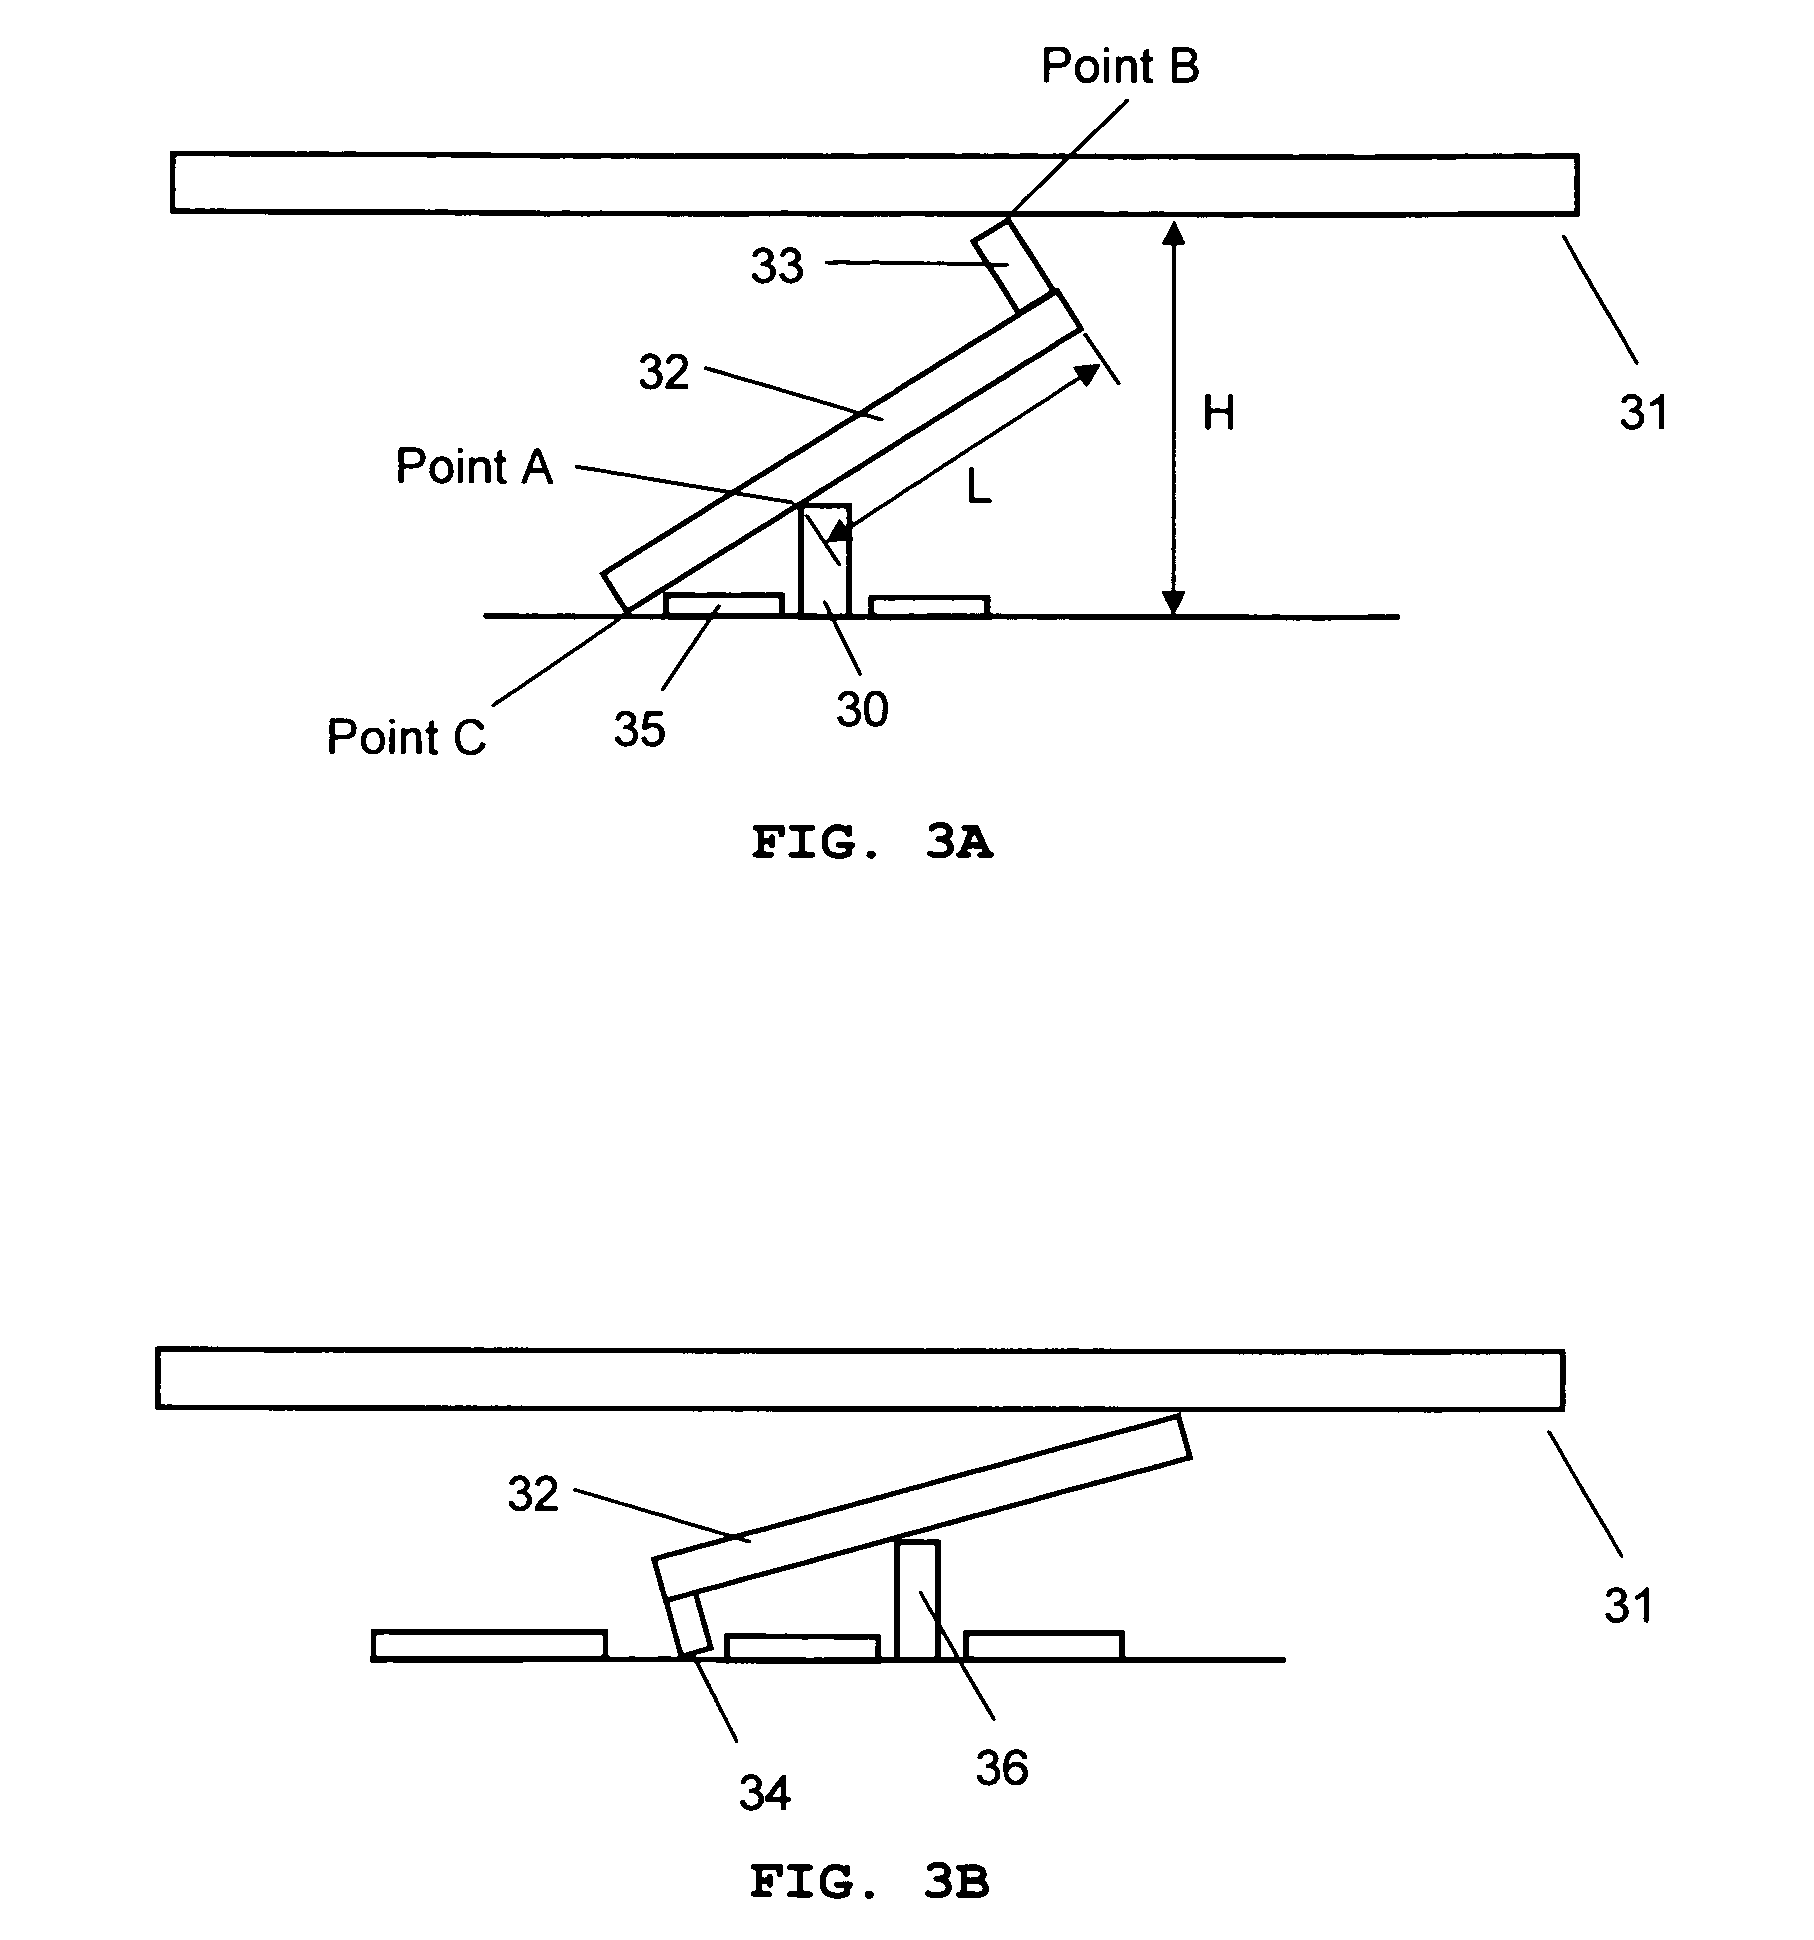 Multi-step microactuator providing multi-step displacement to a controlled object